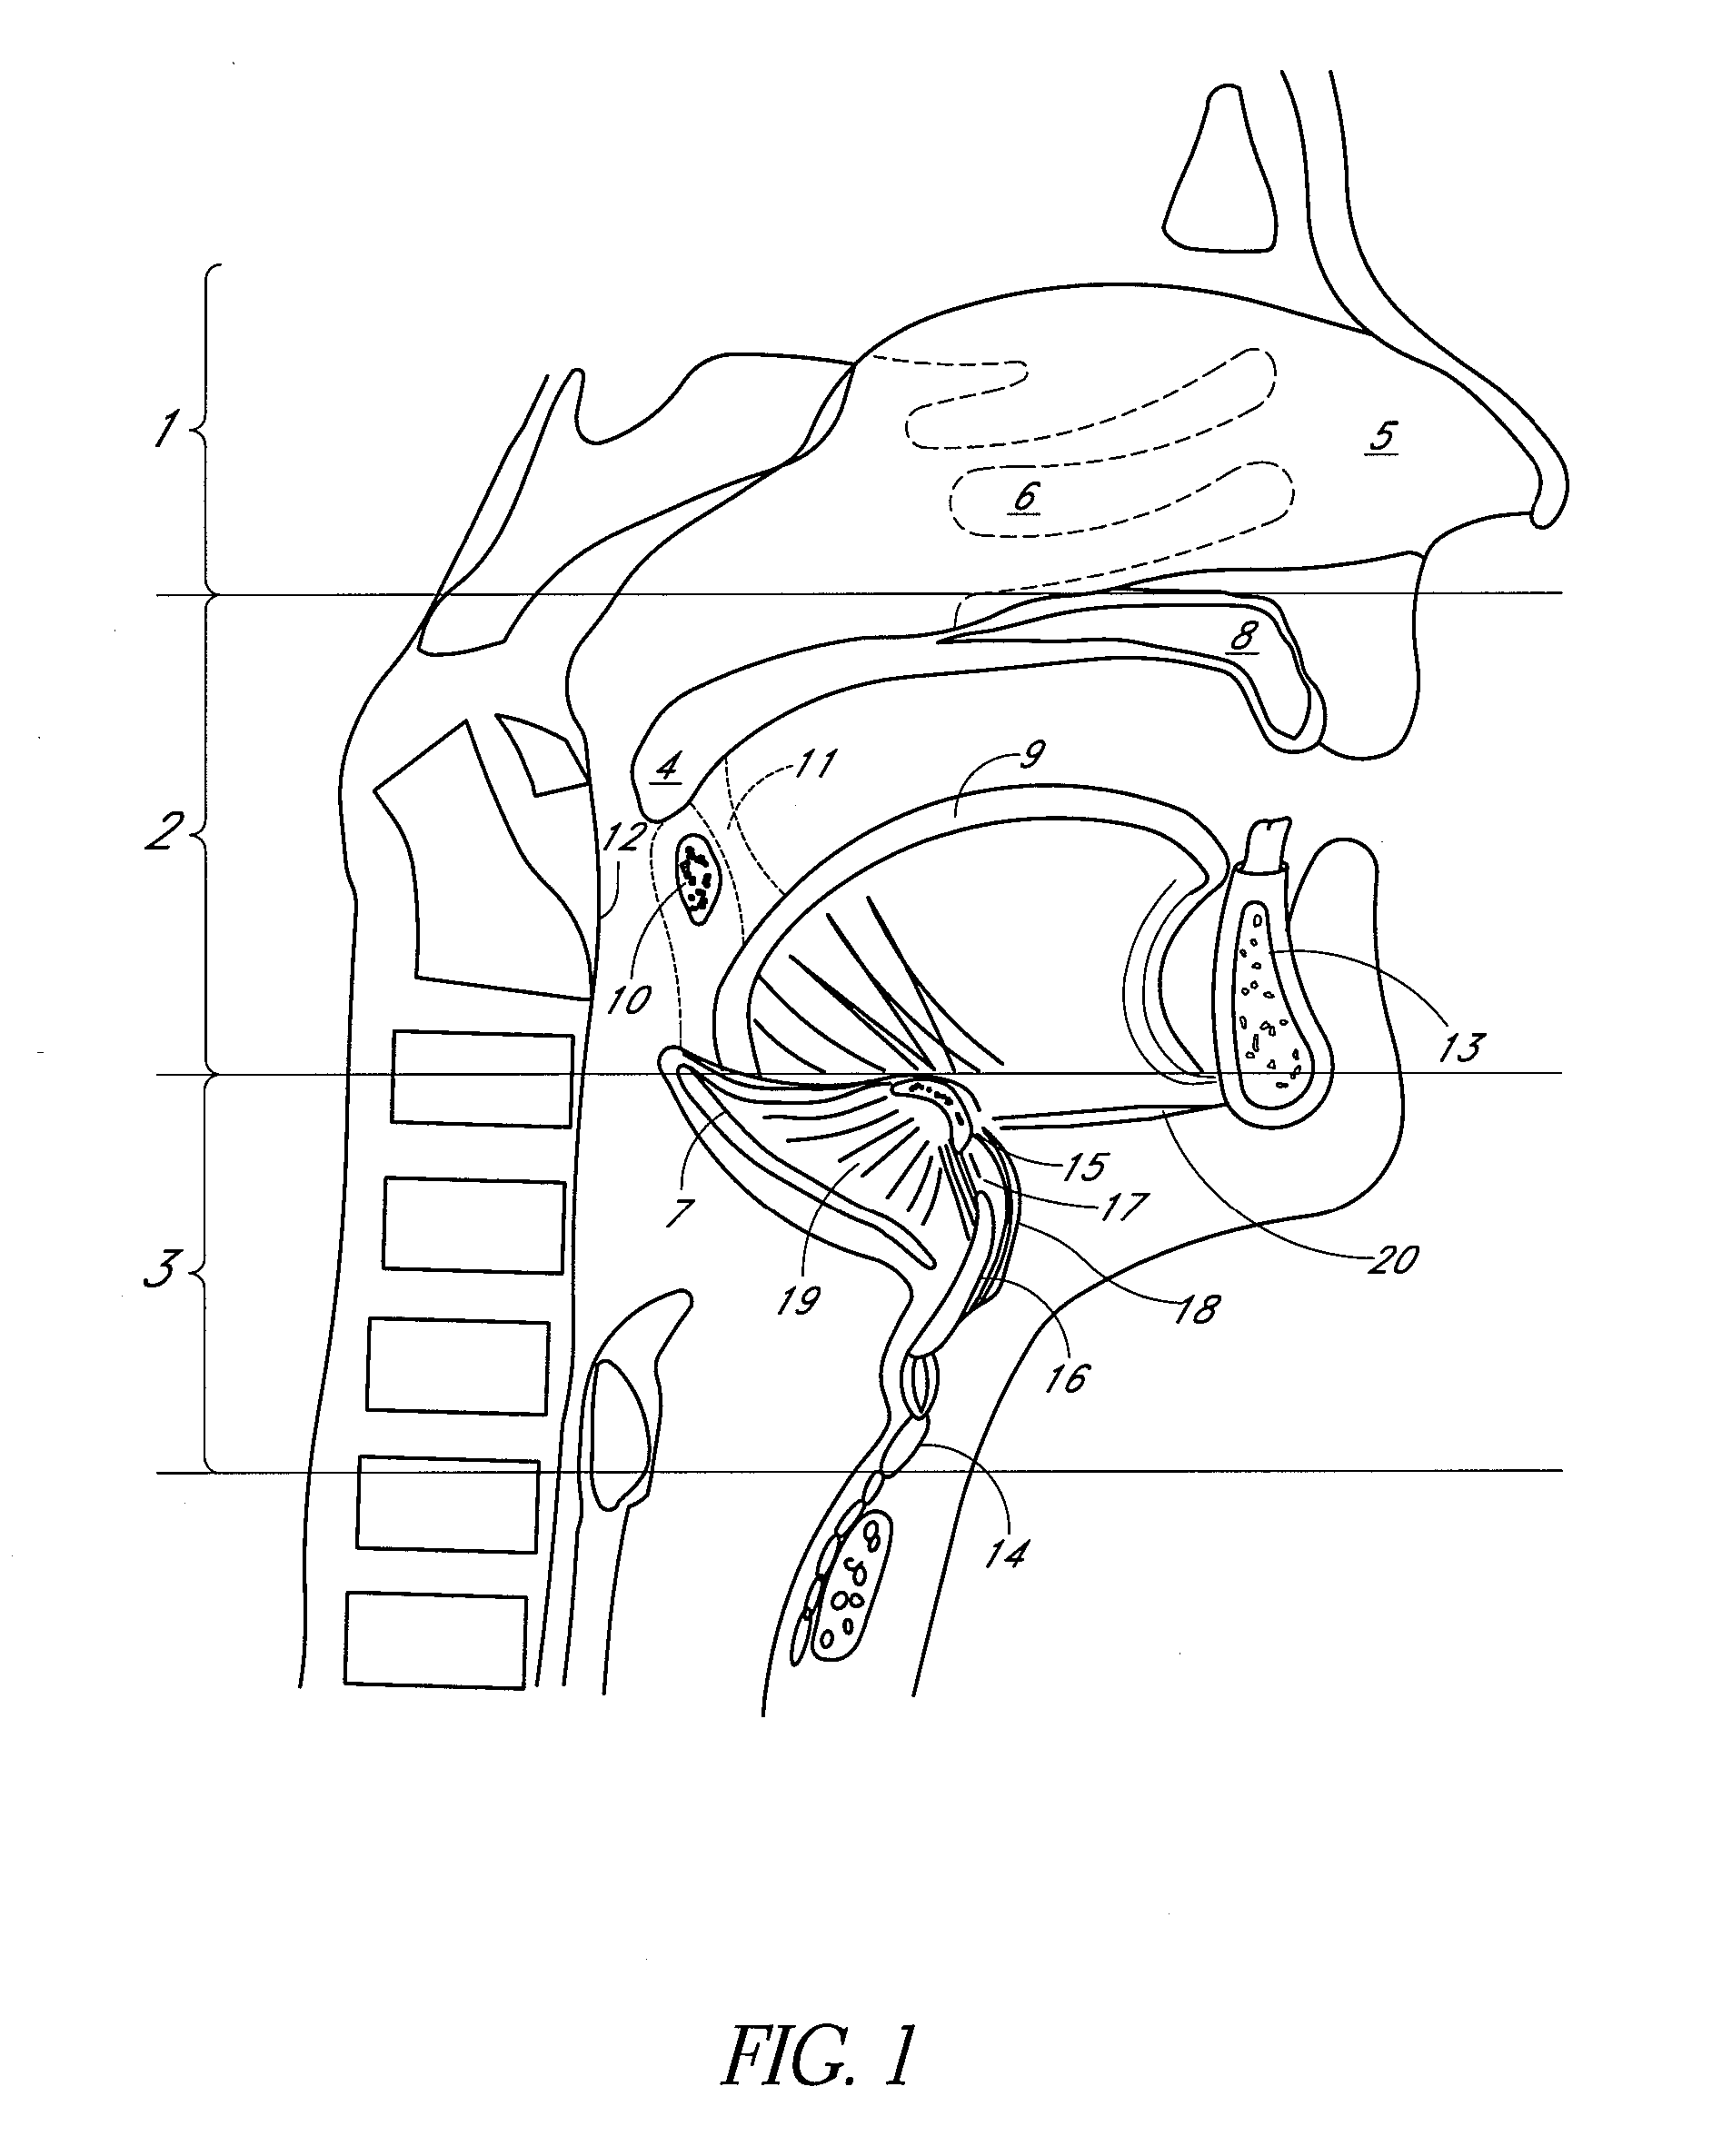 Glossal engagement system and method